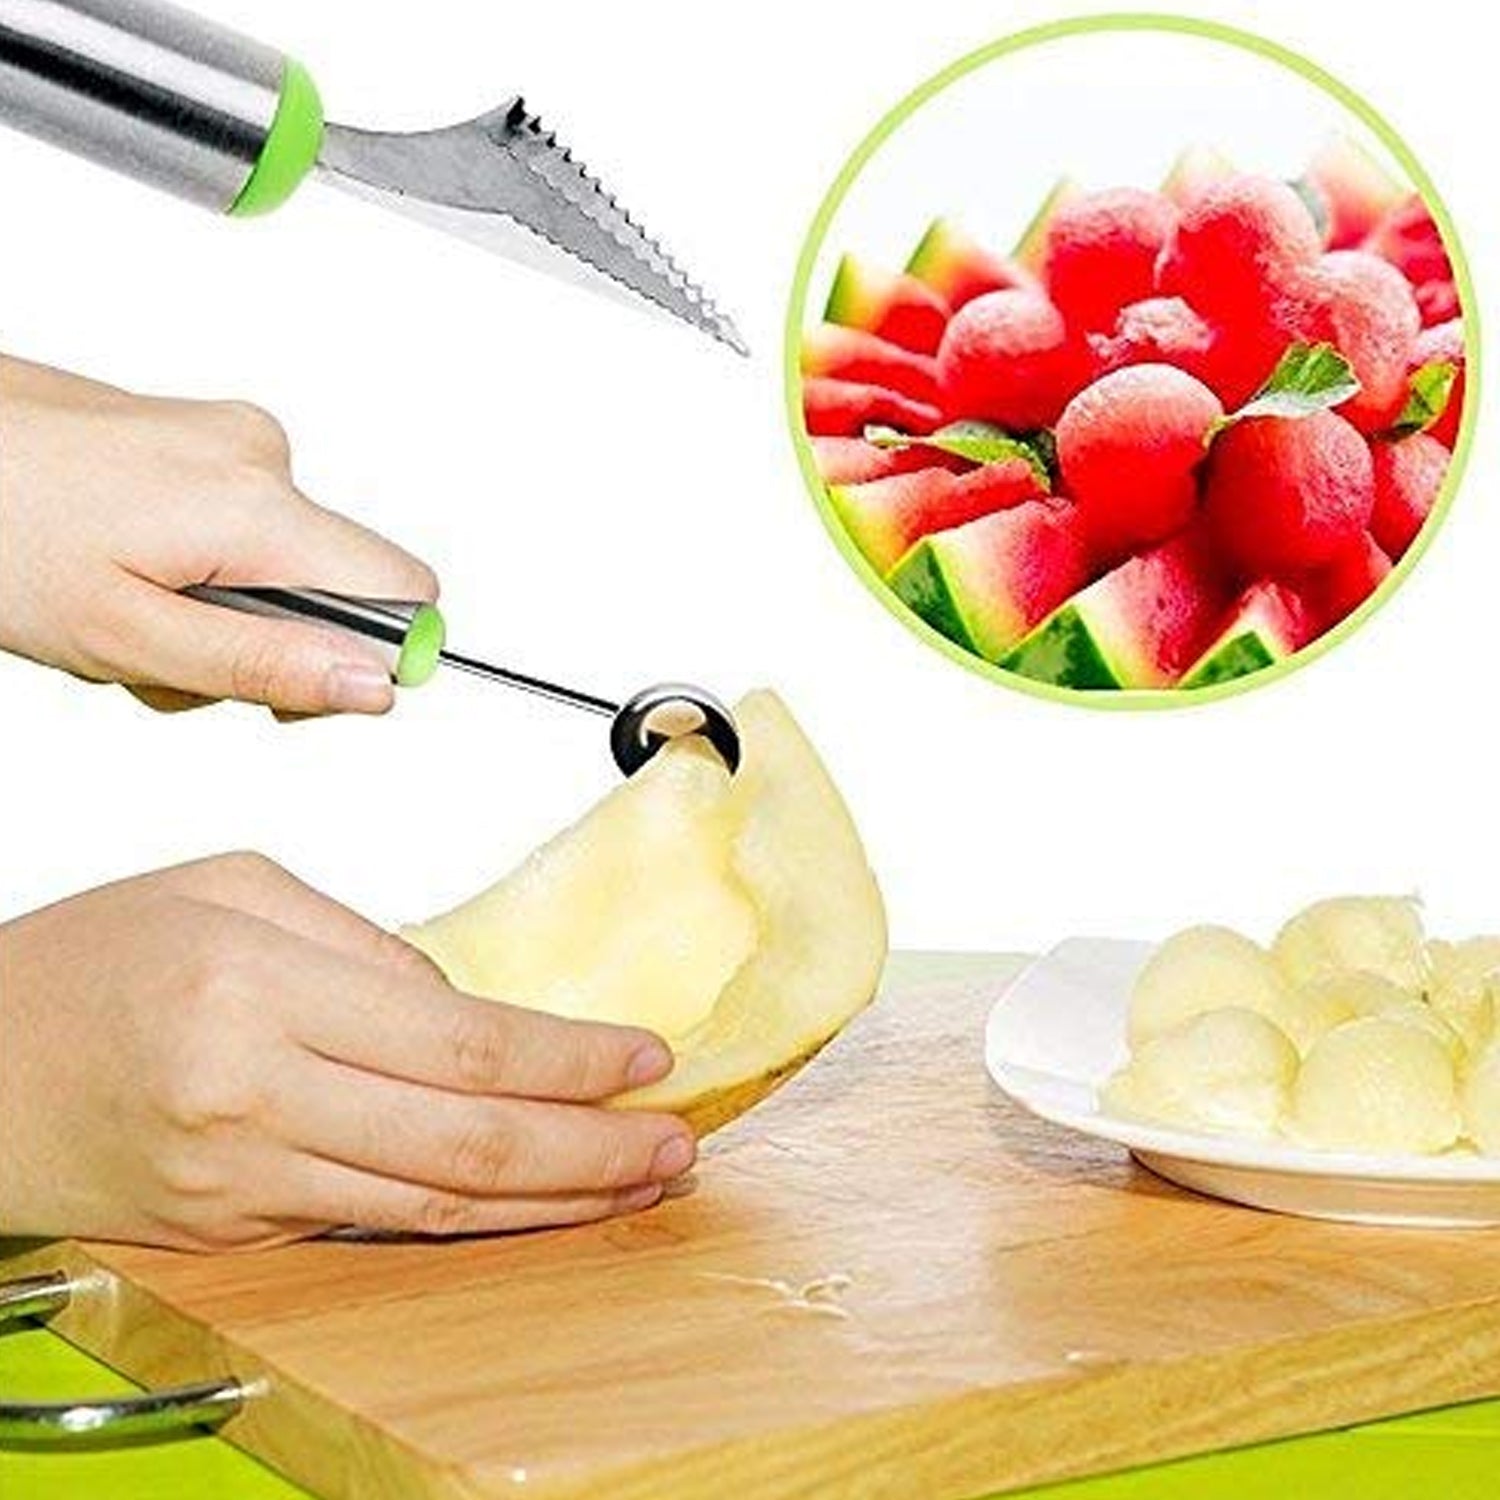 5335 Multifunctional 2 in 1 Melon Baller - Stainless Steel Dig Scoop with Fruit Carving Knife. DeoDap